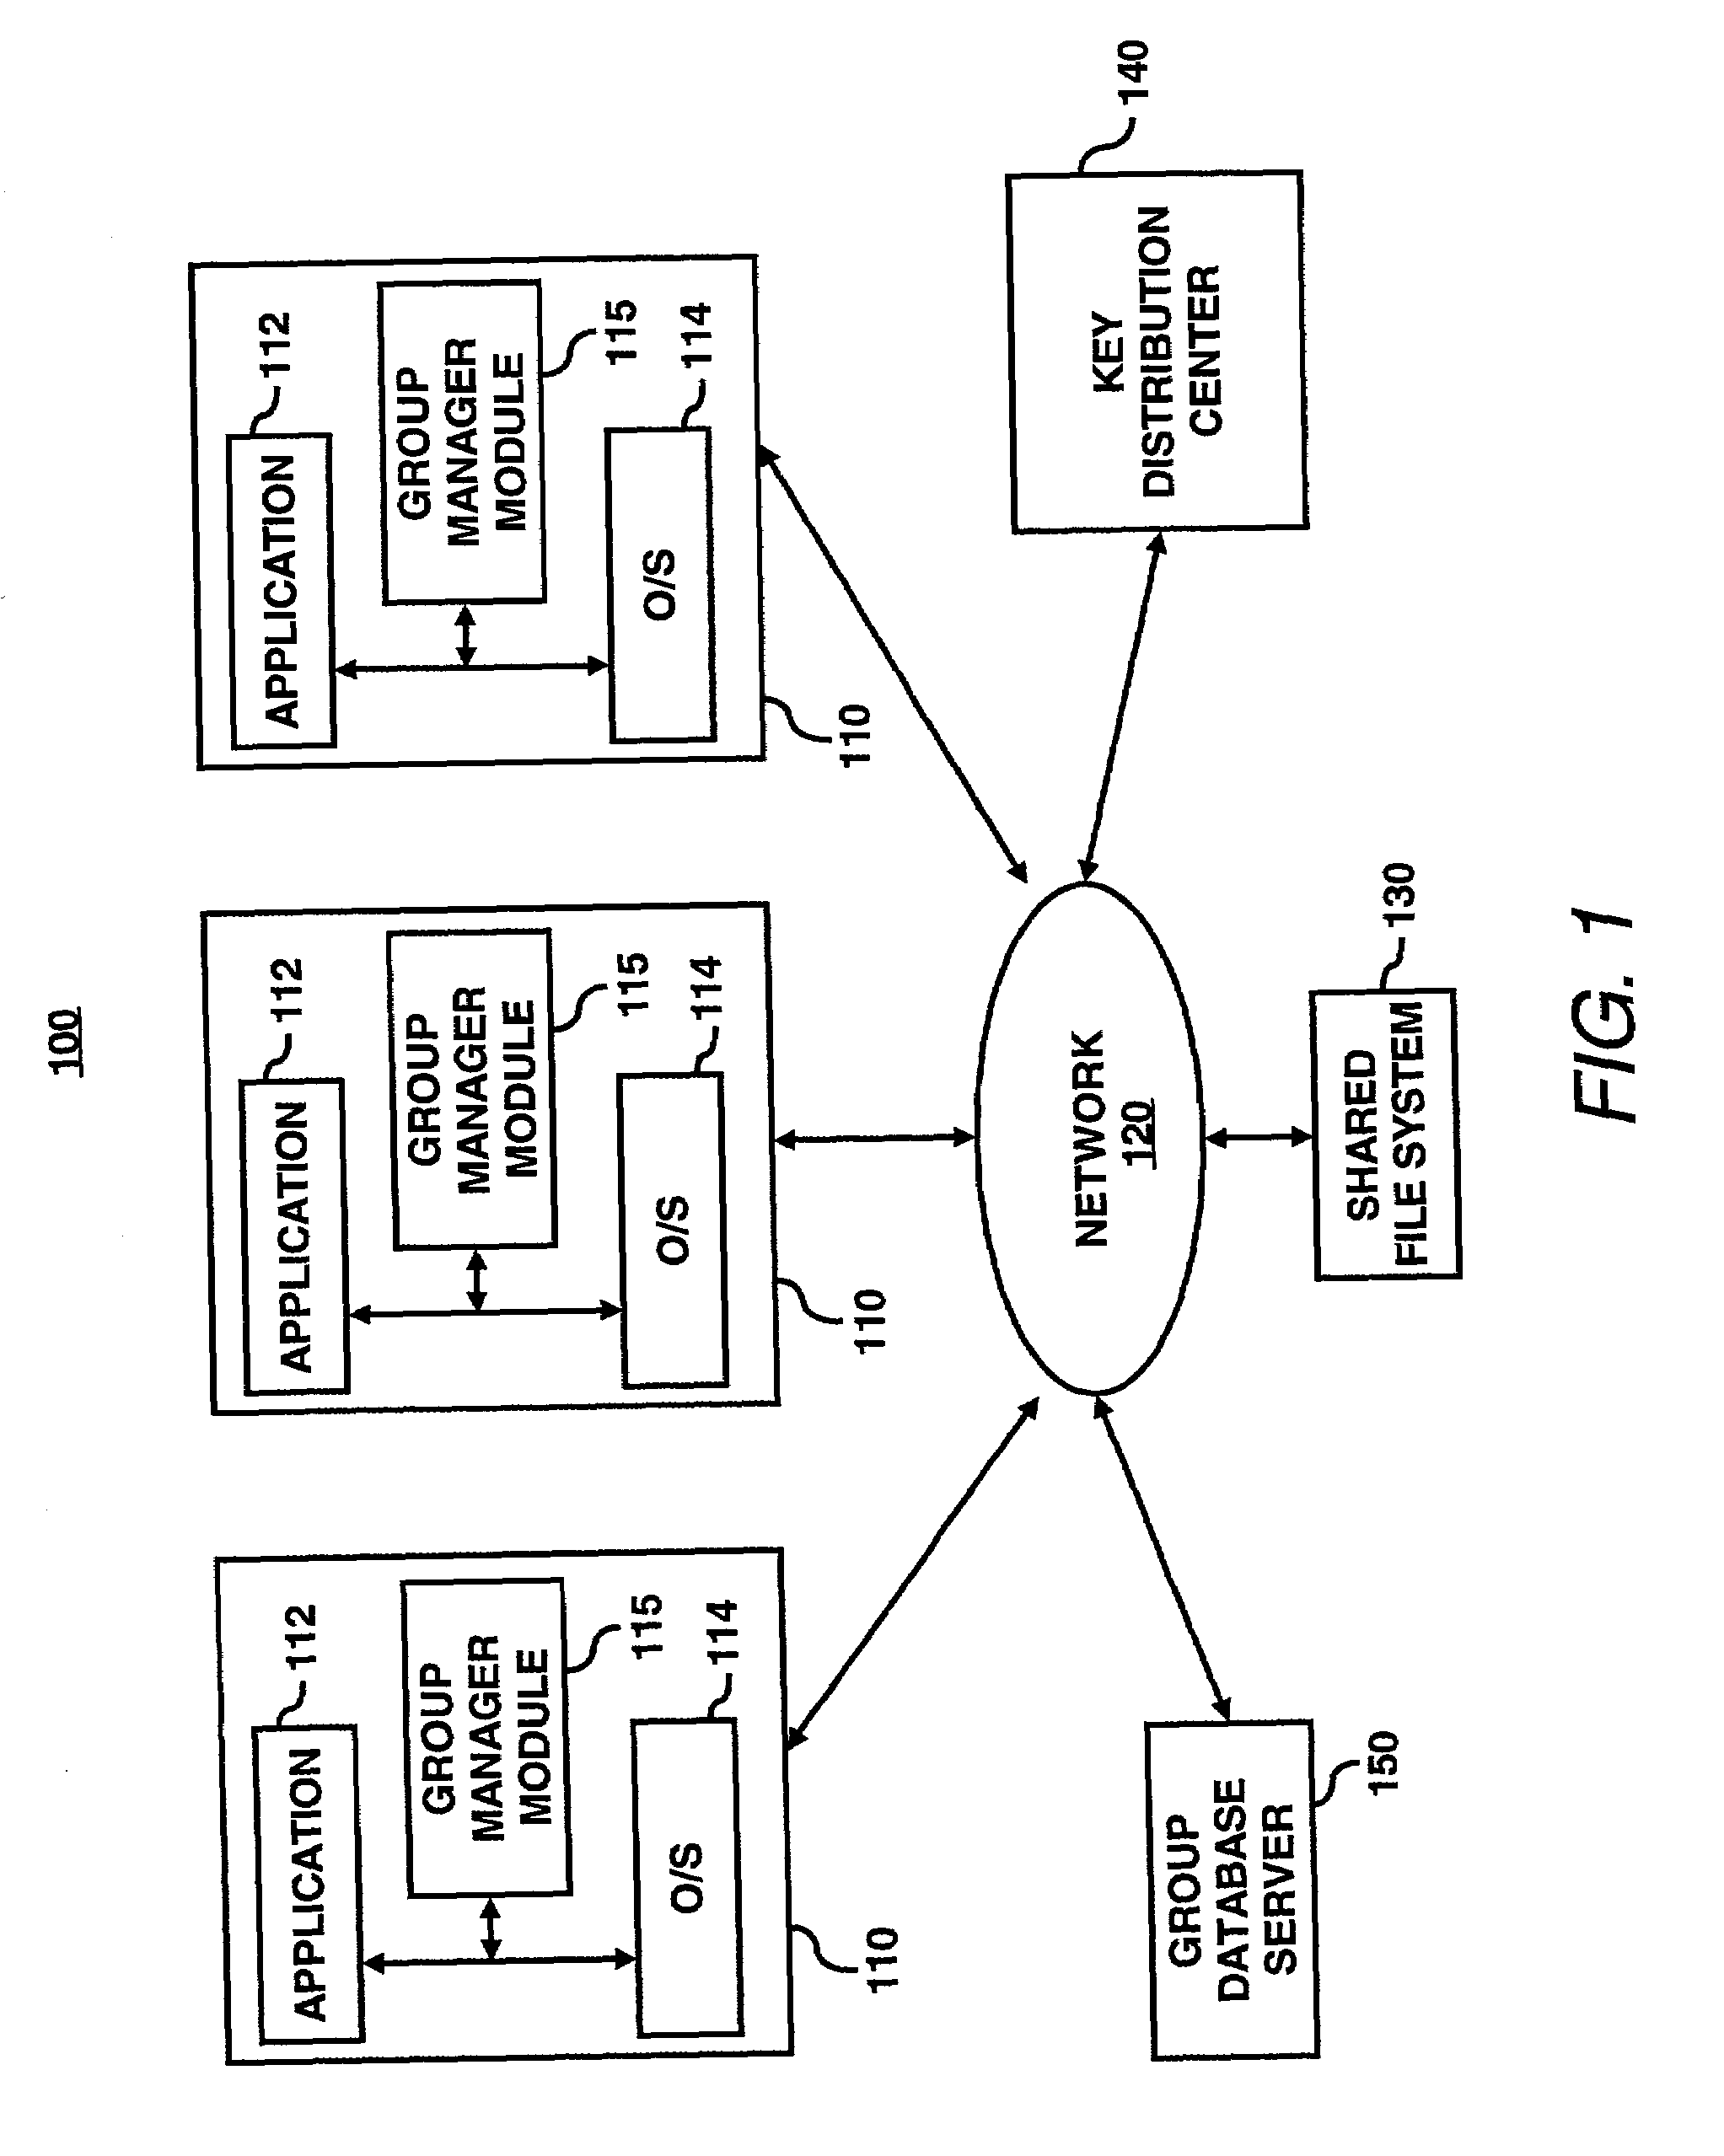 System for optimized key management with file groups